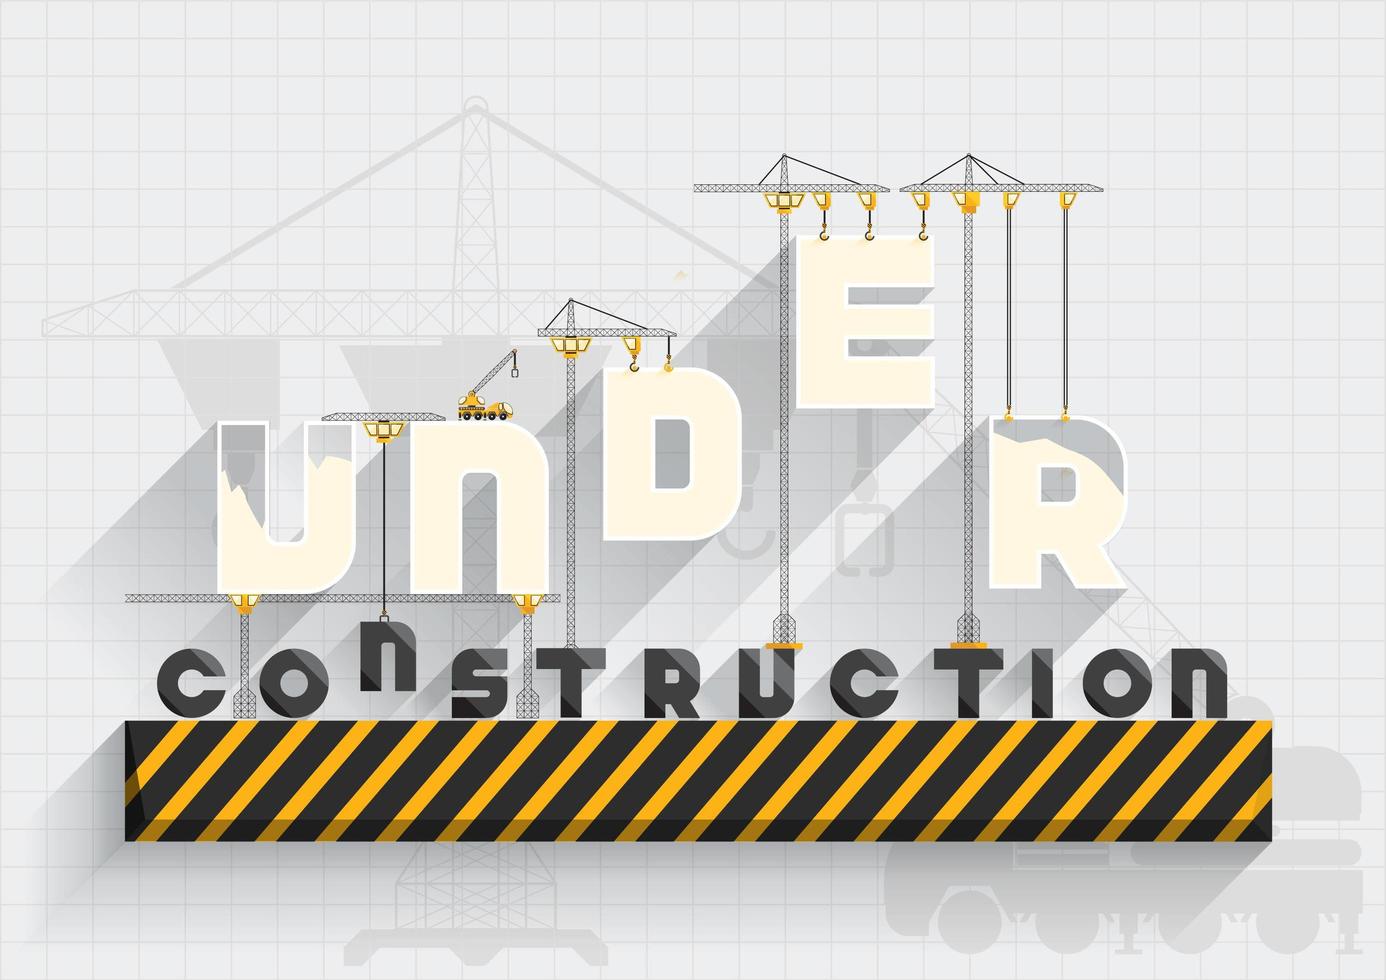 Under construction flat design with text hanging from cranes vector